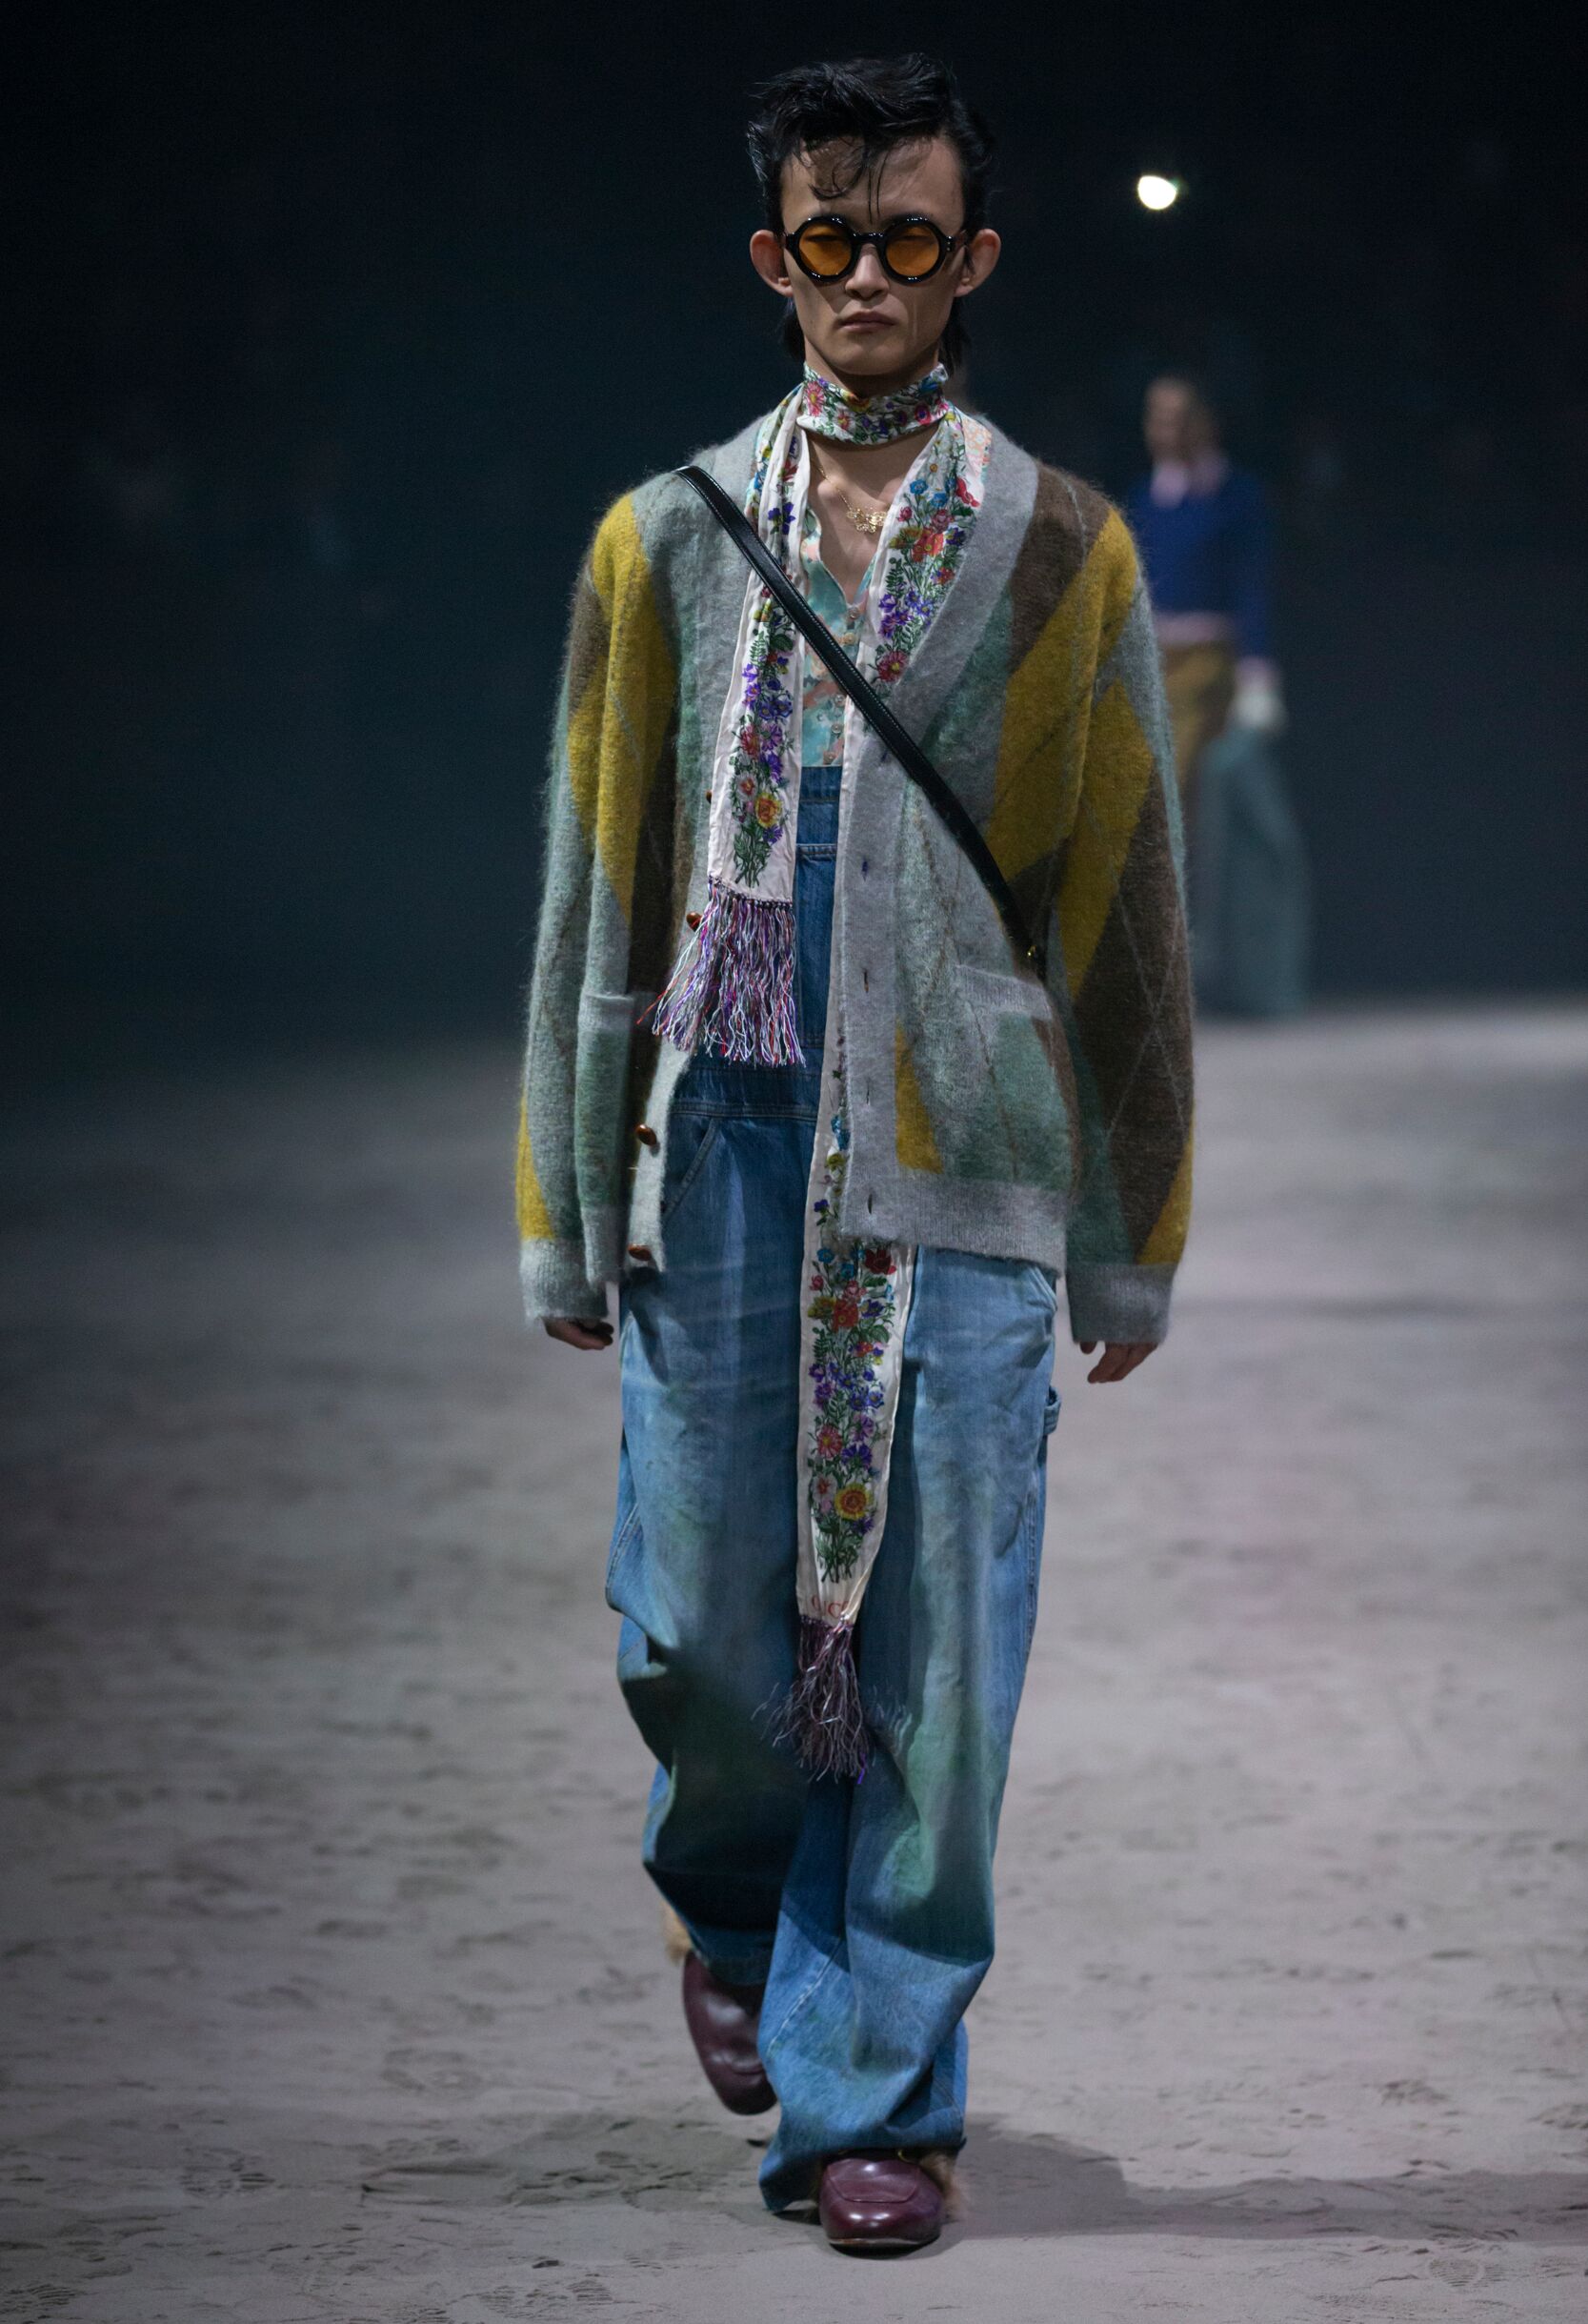 GUCCI FALL WINTER 2020 MEN’S COLLECTION | The Skinny Beep